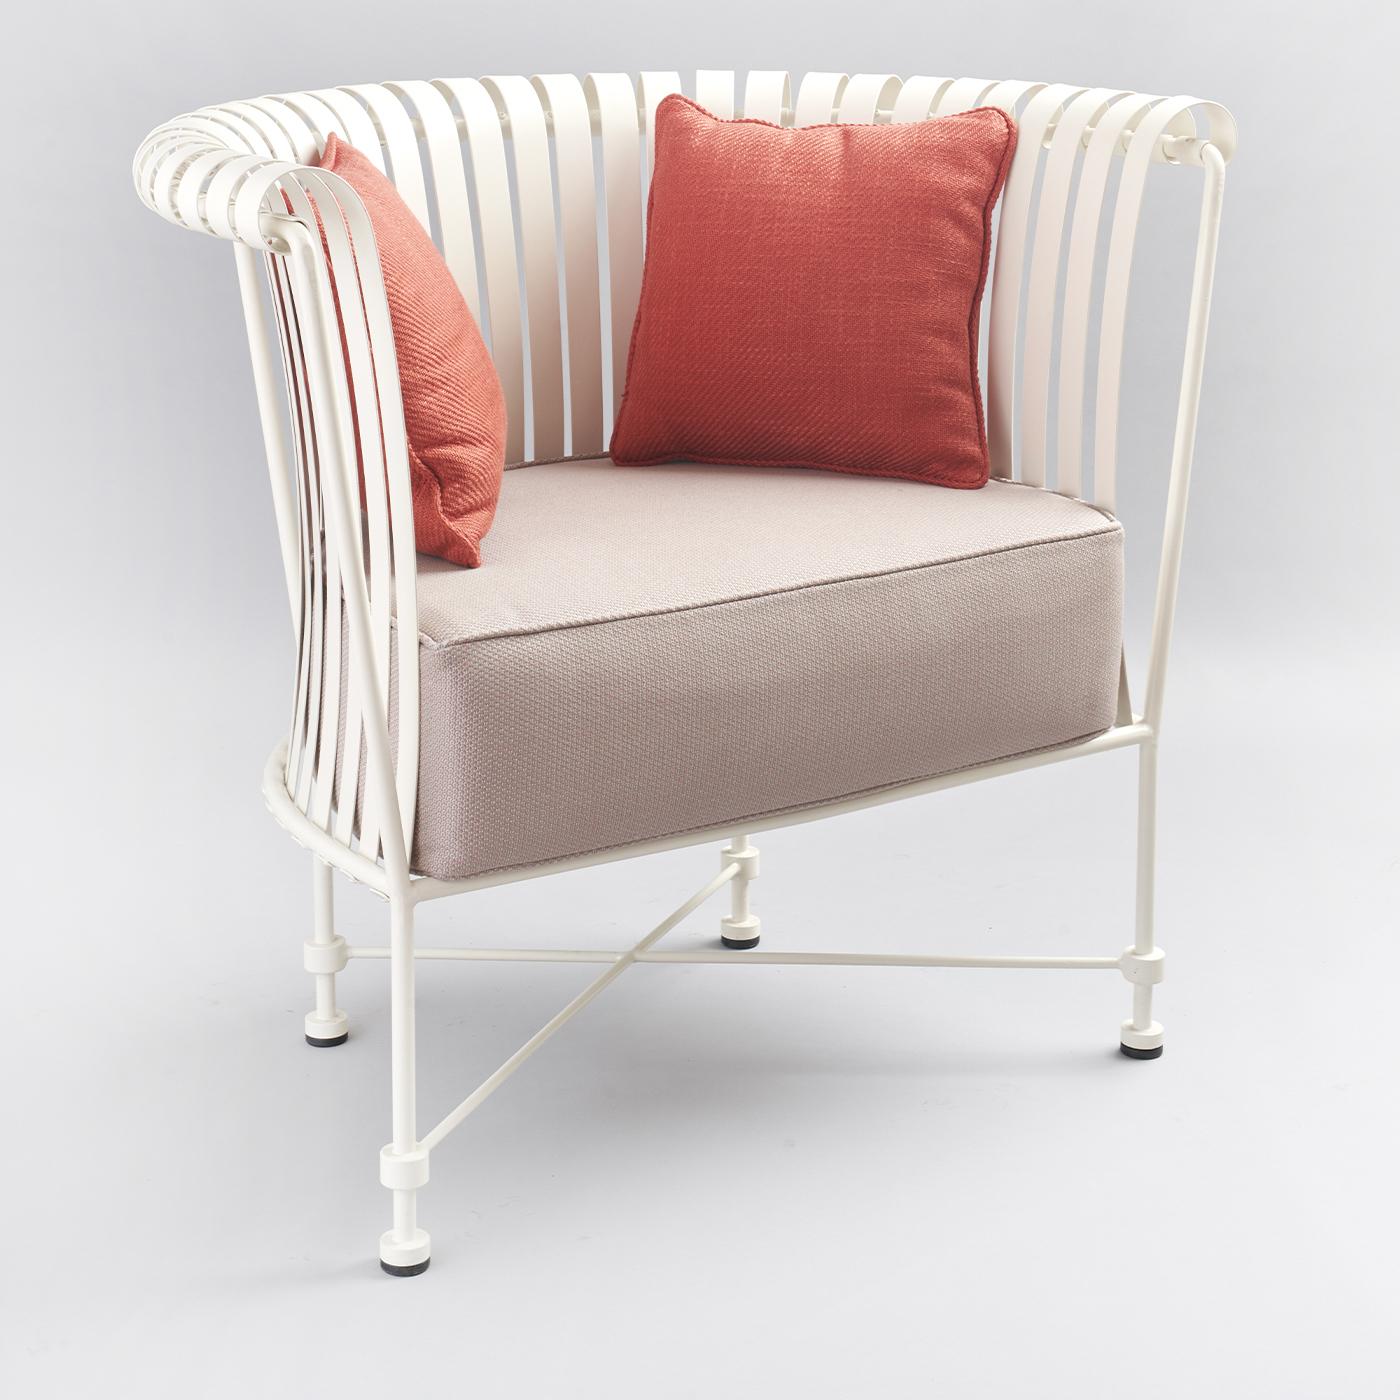 This armchair is made from hand-folded, galvanized, powder-coated, stainless steel. Made in Italy by expert artisans using historic techniques, its unique, multi-slatted back offers a blend of traditional Florentine craftsmanship with creative,